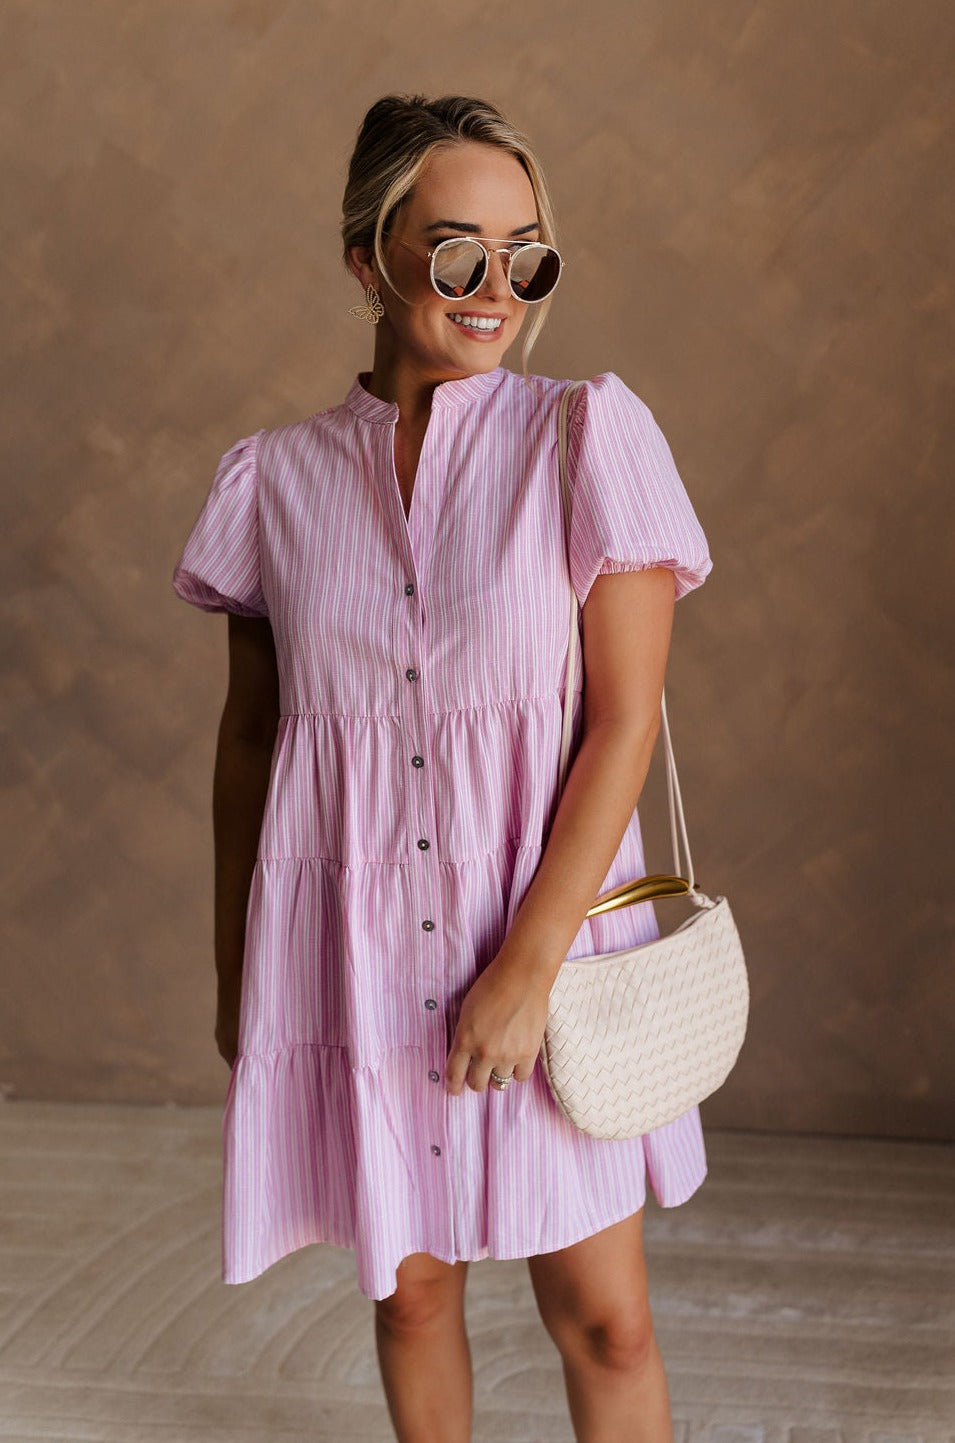 Upper body front view of female model wearing the Cameron Pink & White Striped Dress that has pink and white vertical striped fabric, short puff sleeves, a tiered skirt, and button up front.